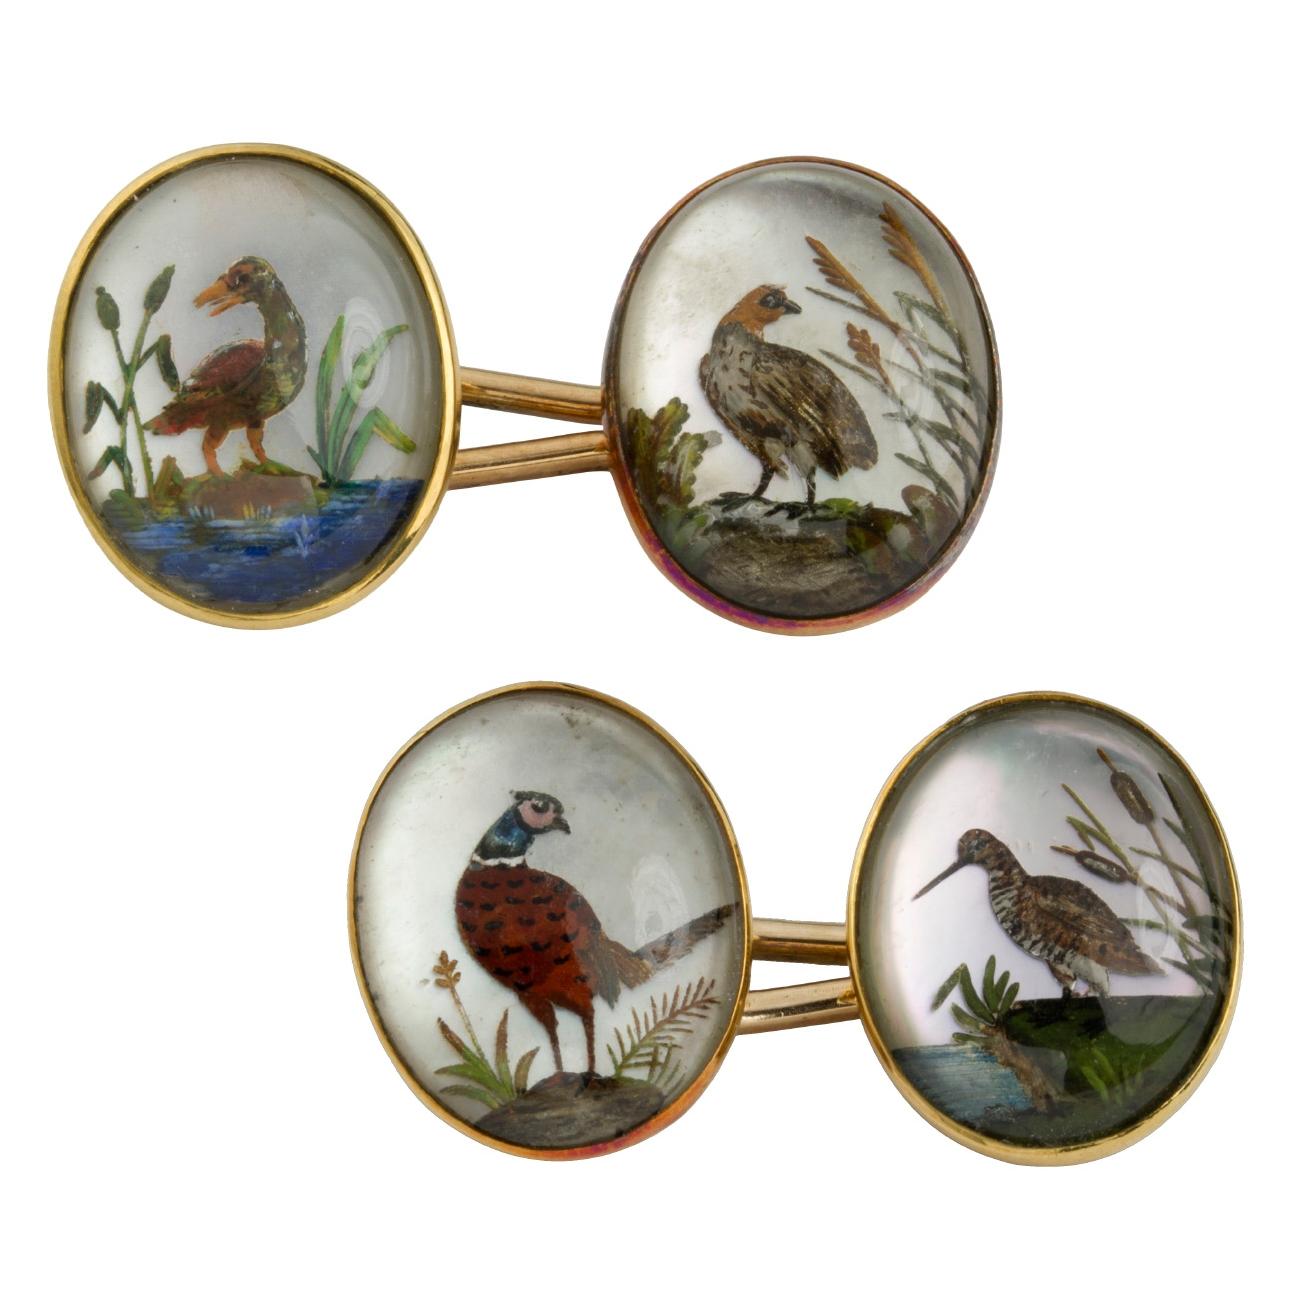  pair of late Victorian reverse intaglio crystal cufflinks, the cabochon-cut crystal faces each depicting different images of game birds, each set on an 18 carat gold rubover mount, connected by a baton fastening, hallmarked 18 carat gold, circa